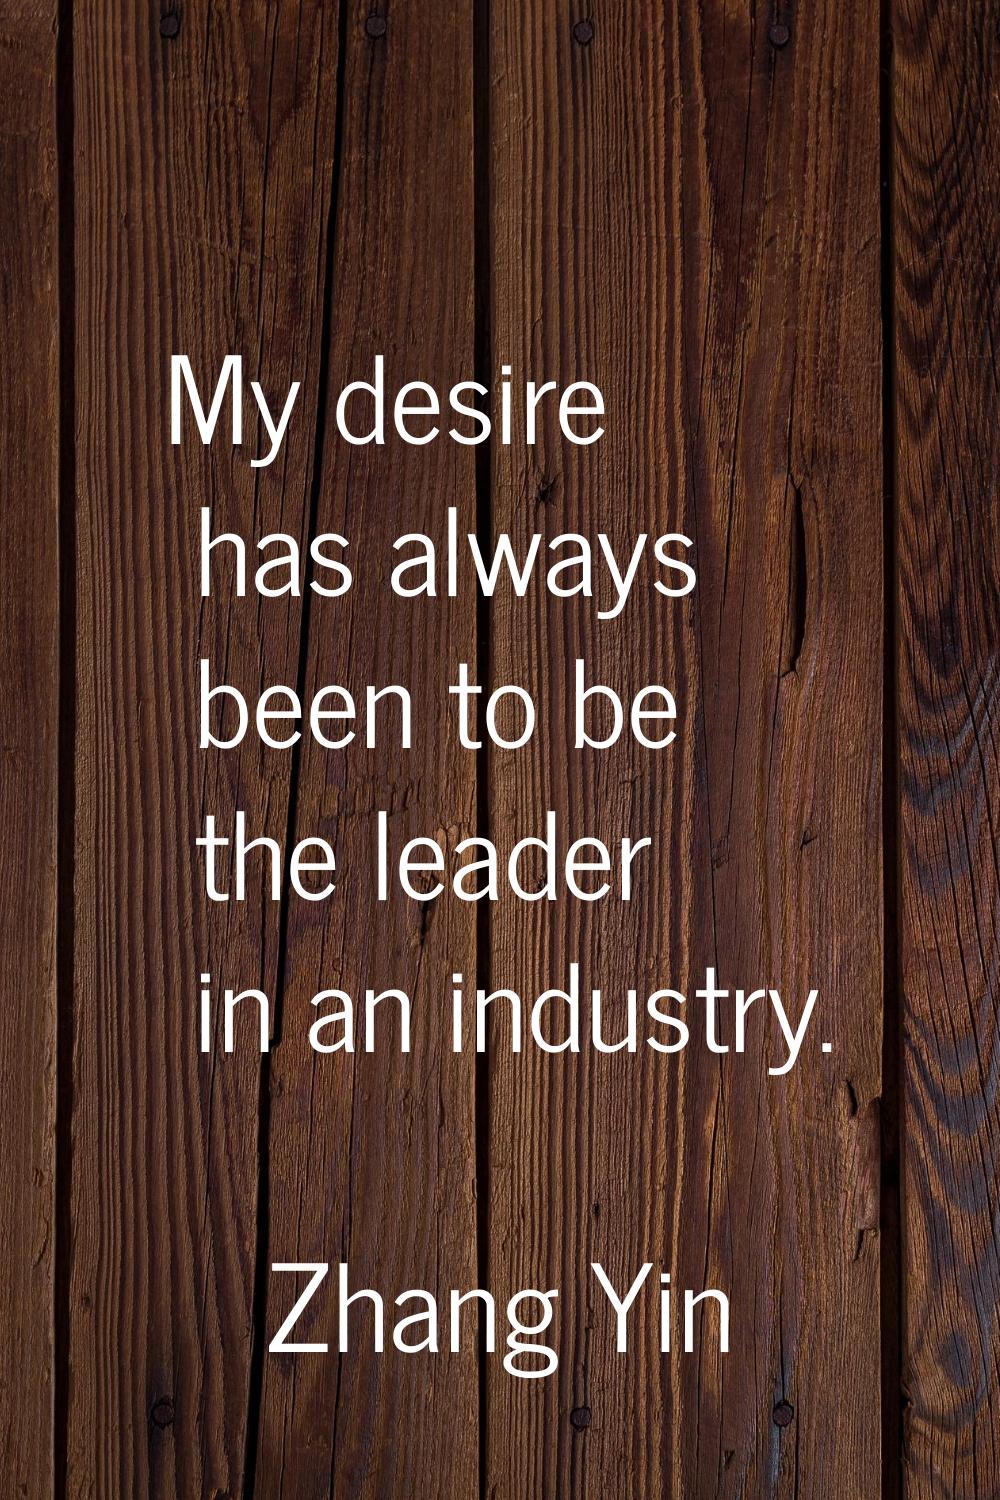 My desire has always been to be the leader in an industry.